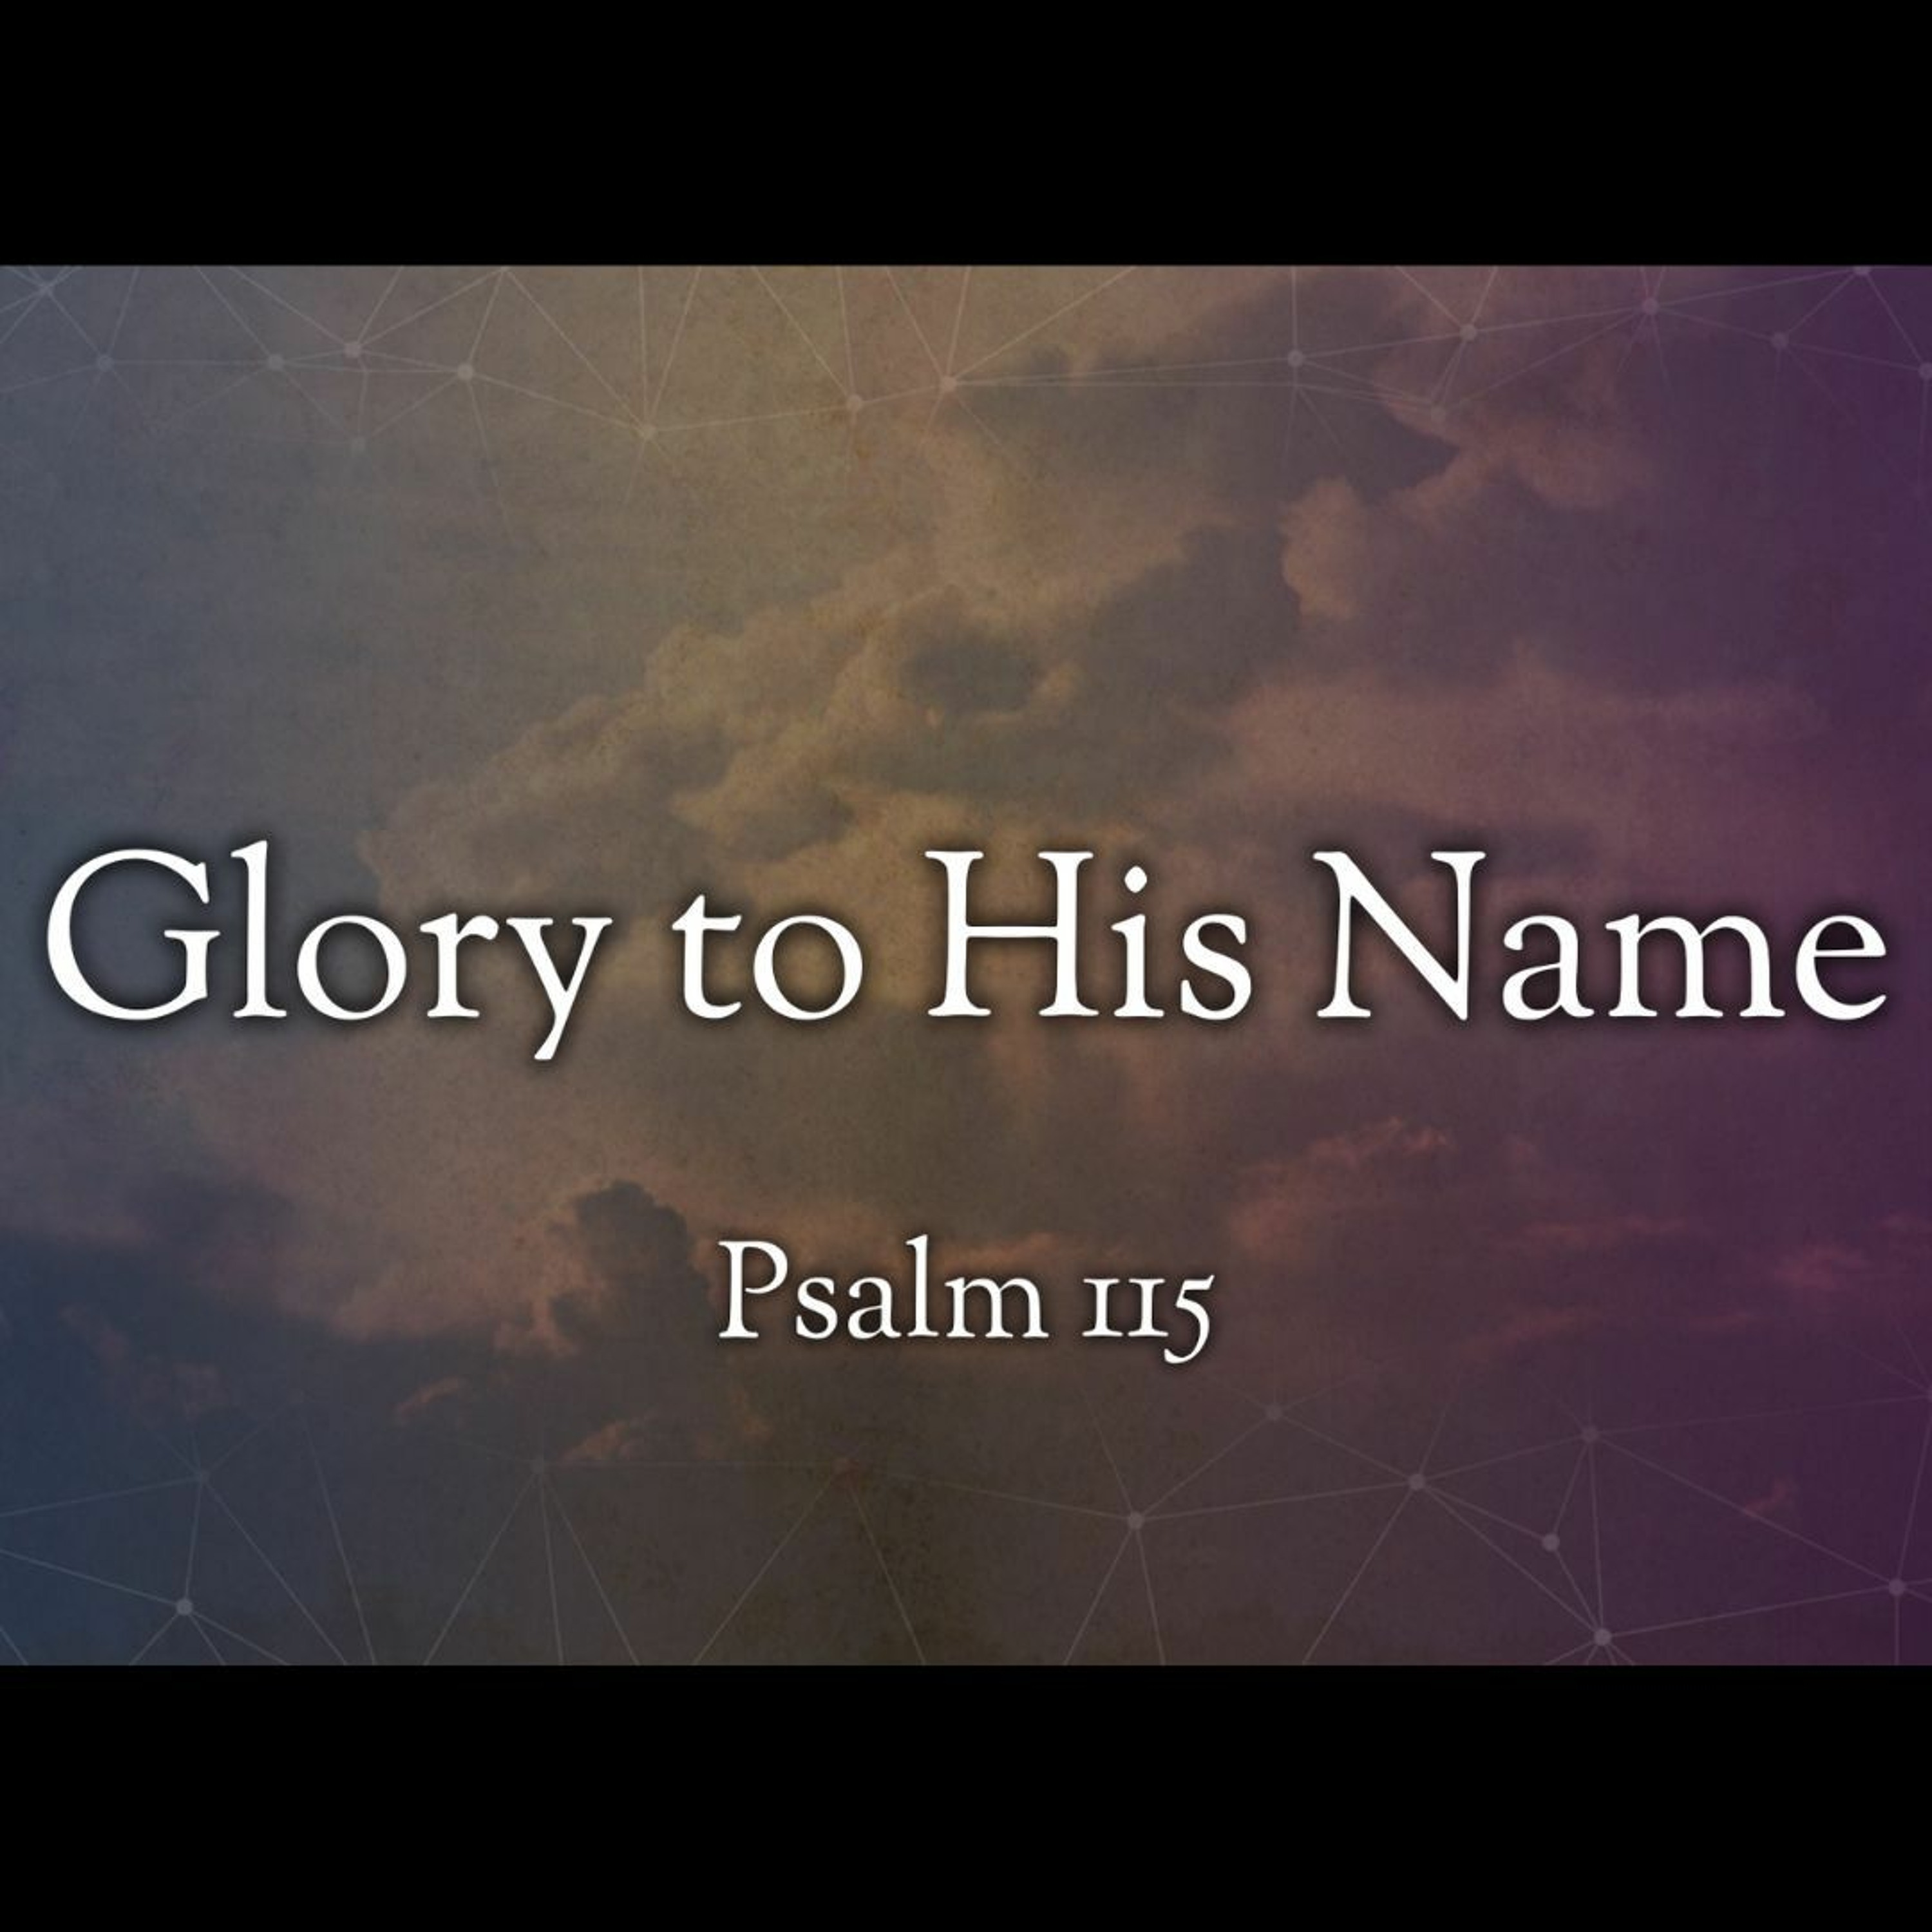 Glory to His Name (Psalm 115)